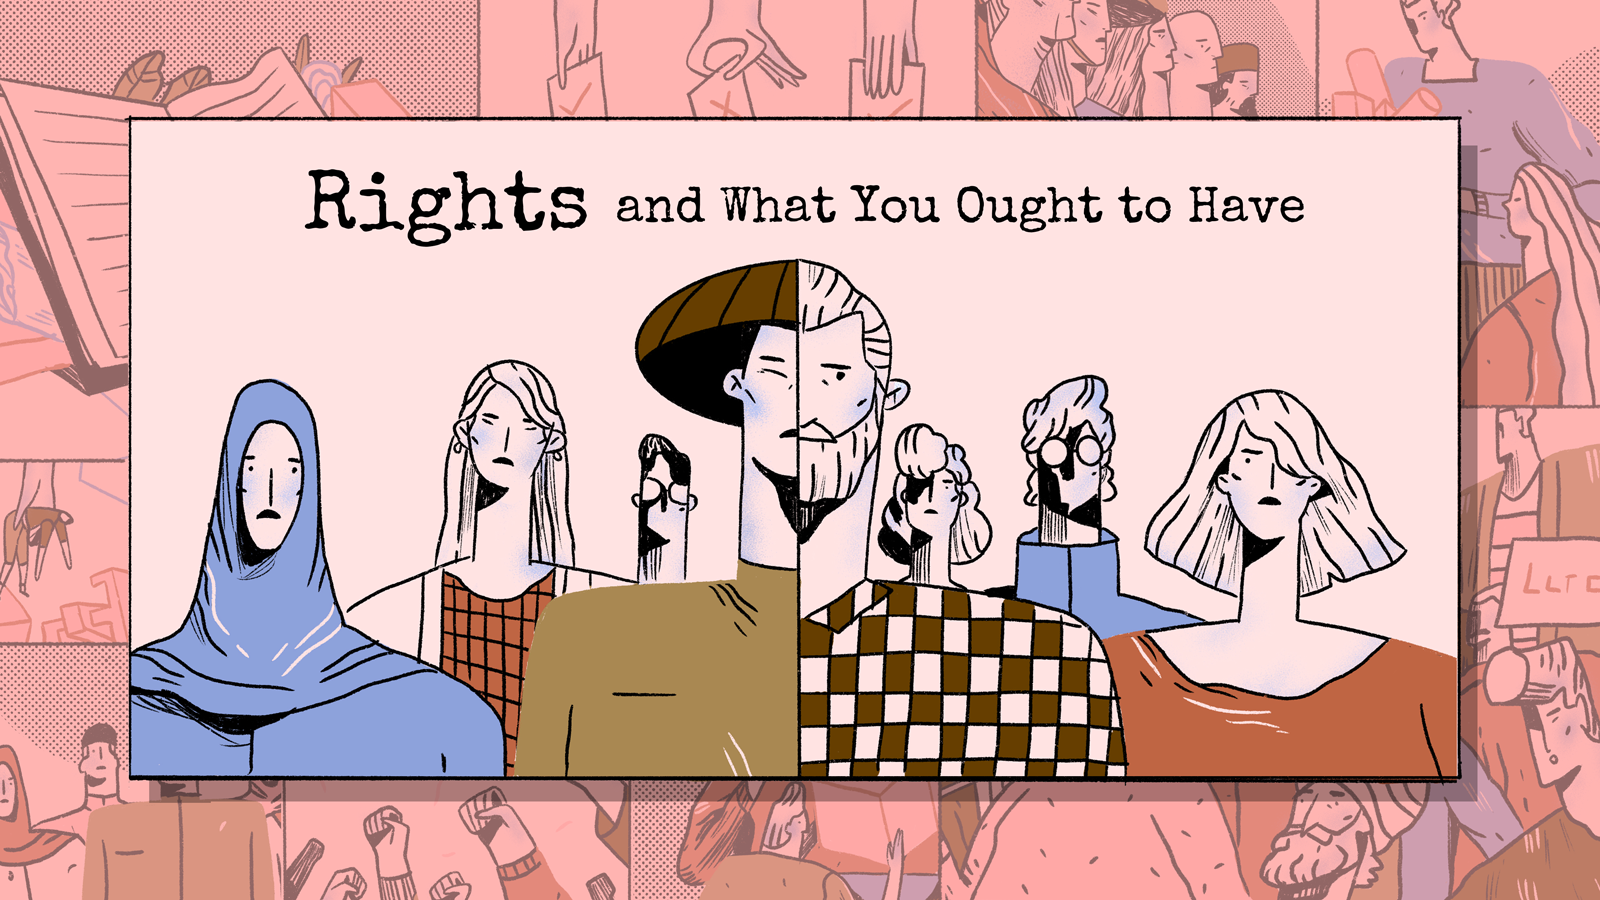 NN Explains: Rights and What You Ought to Have